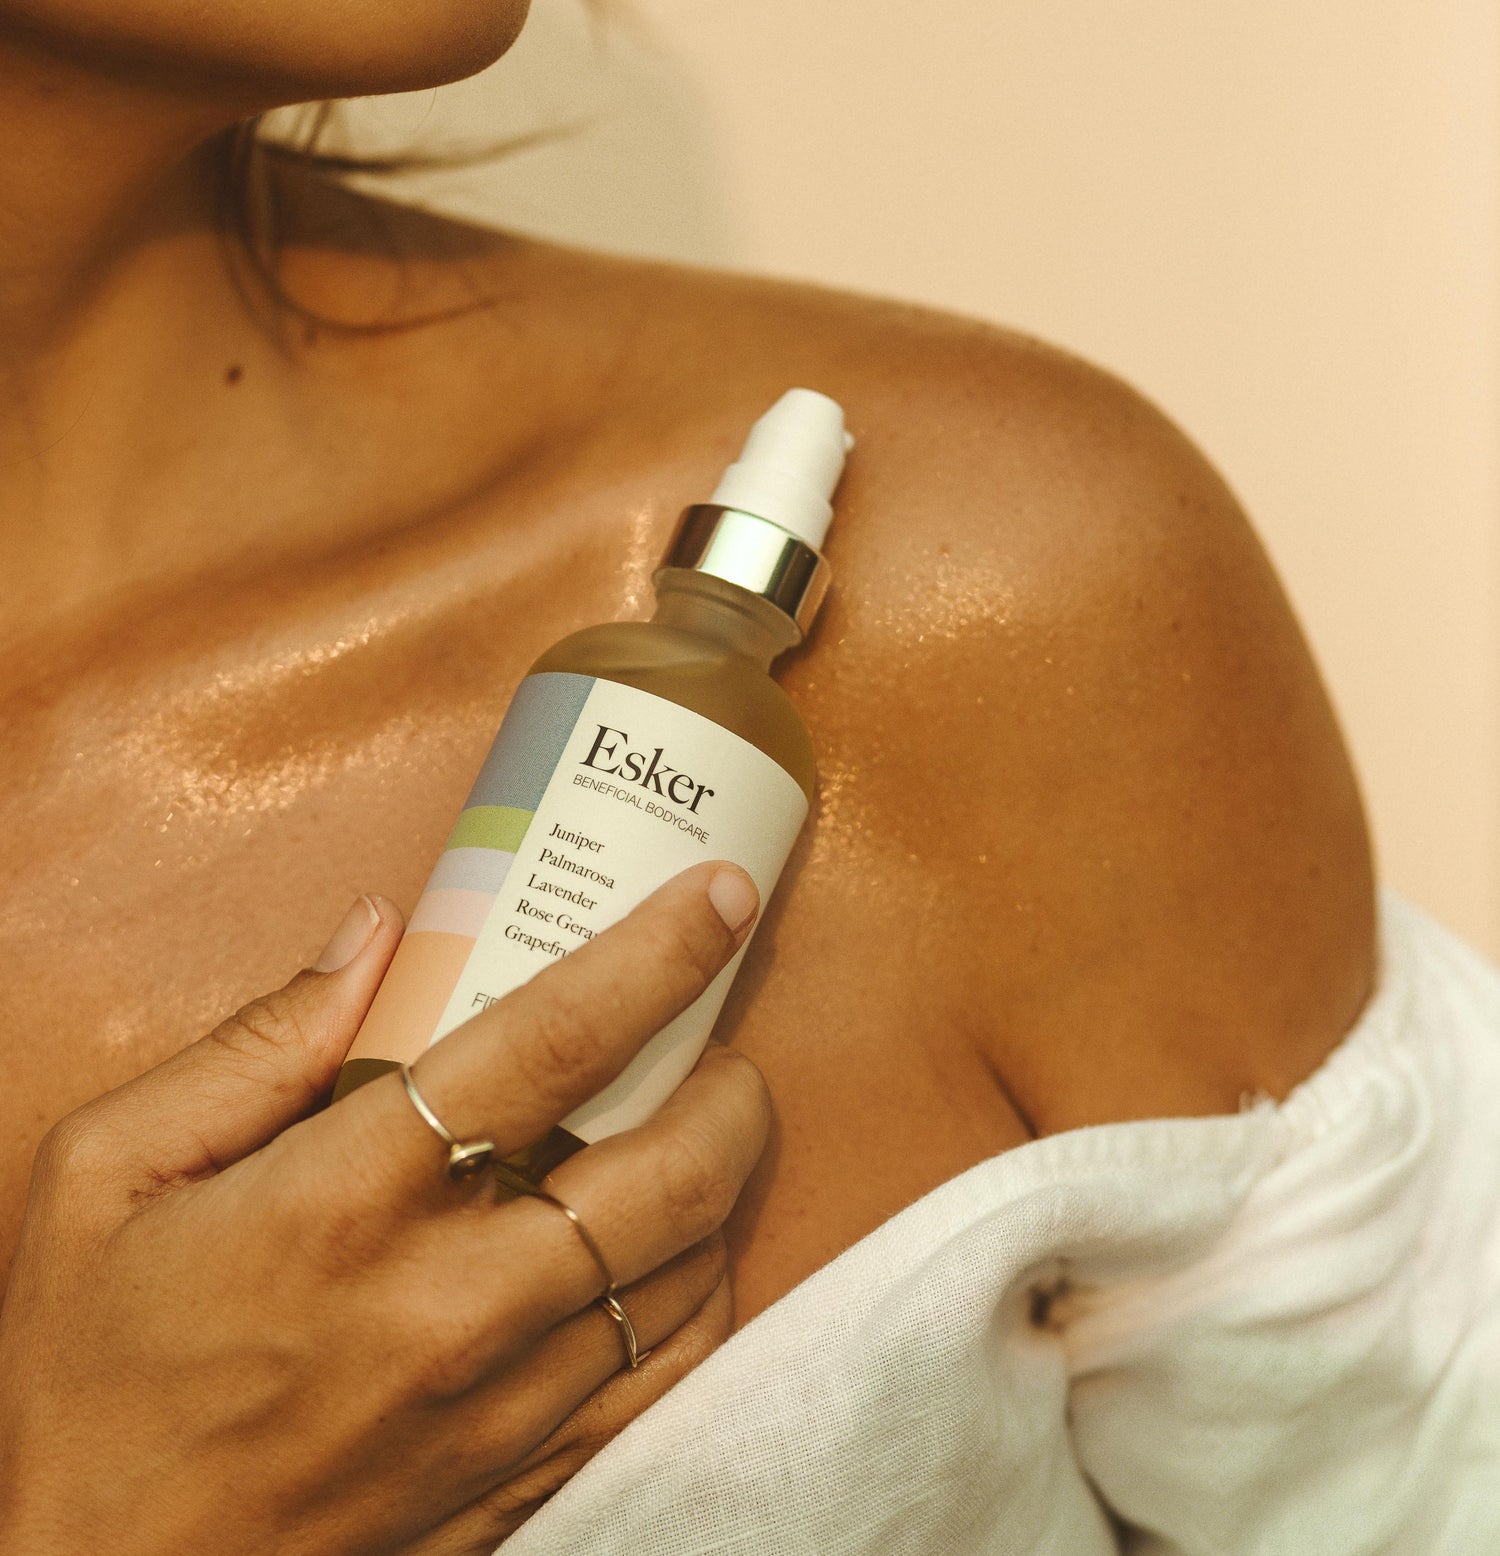 Support, comfort, and style—discover the perfect fit with Bodycare